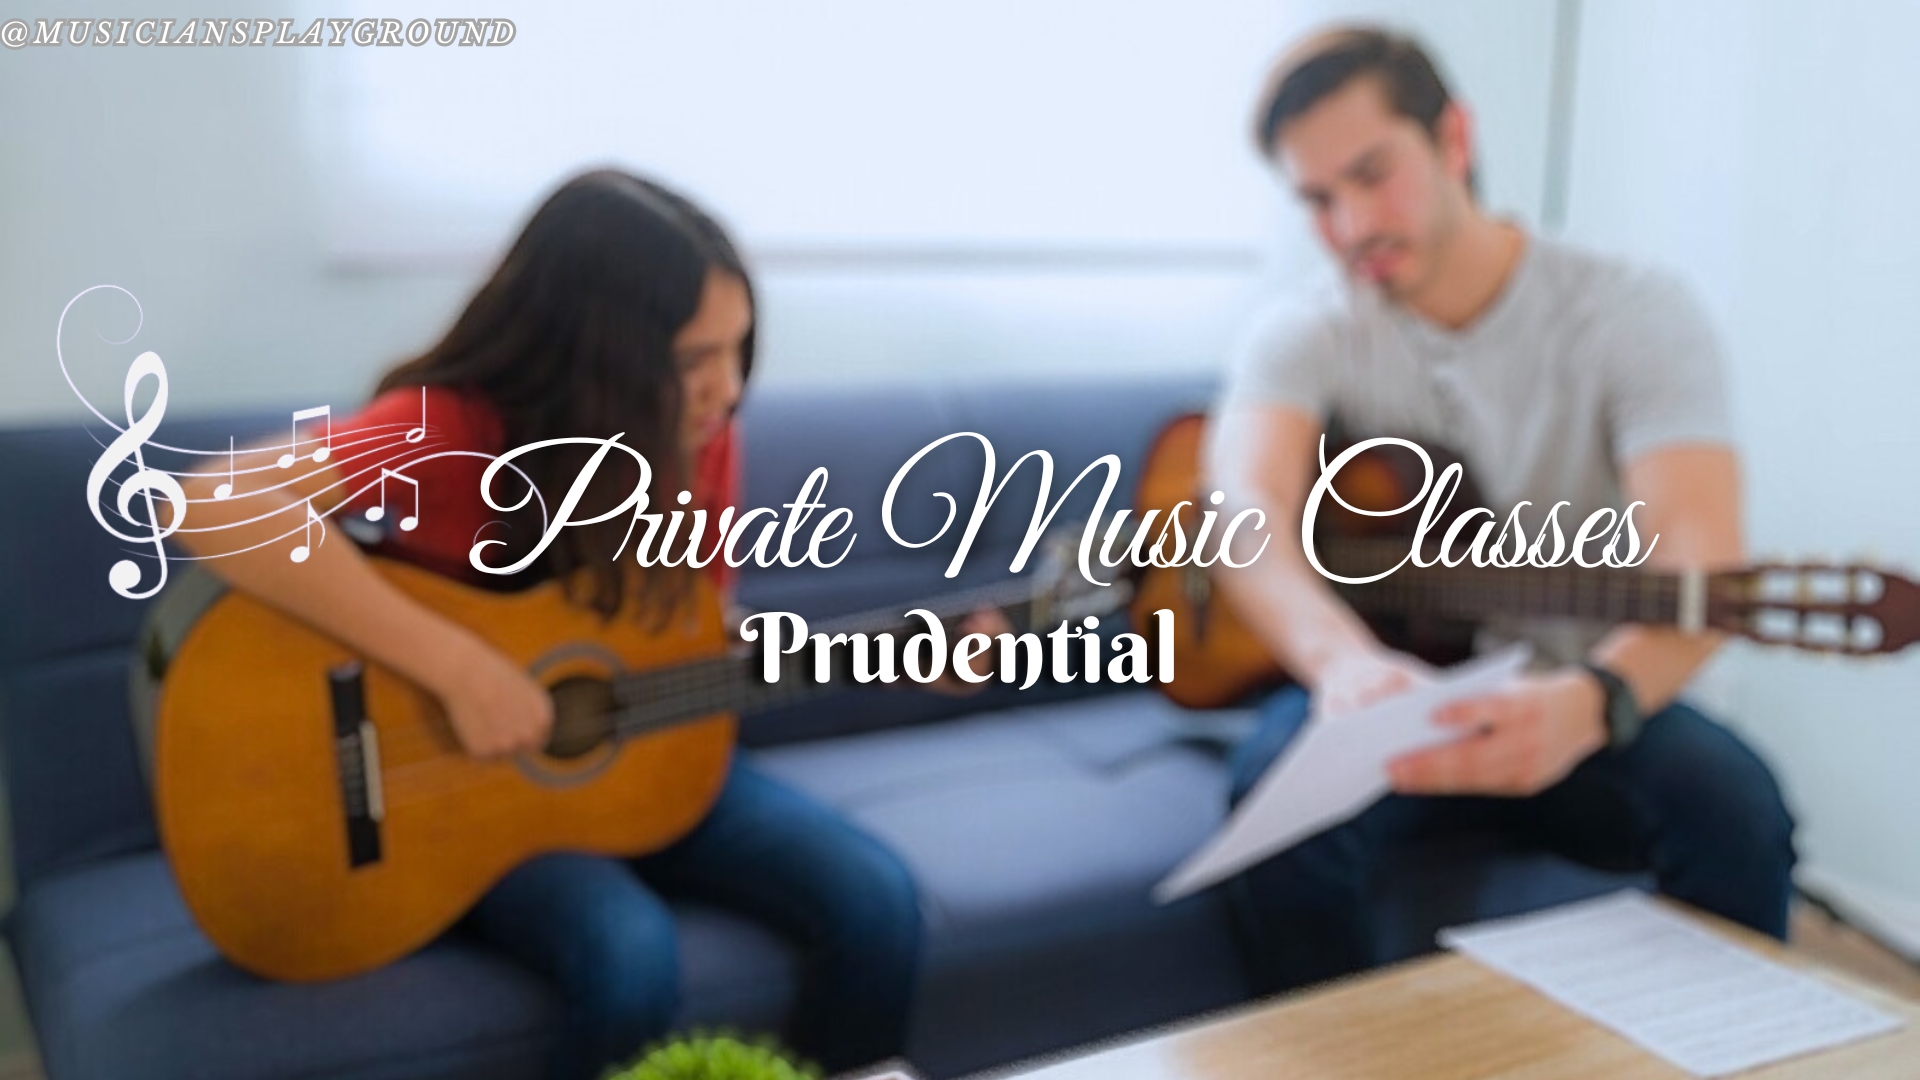 Prudential Music Education: Private Music Lessons at Musicians Playground